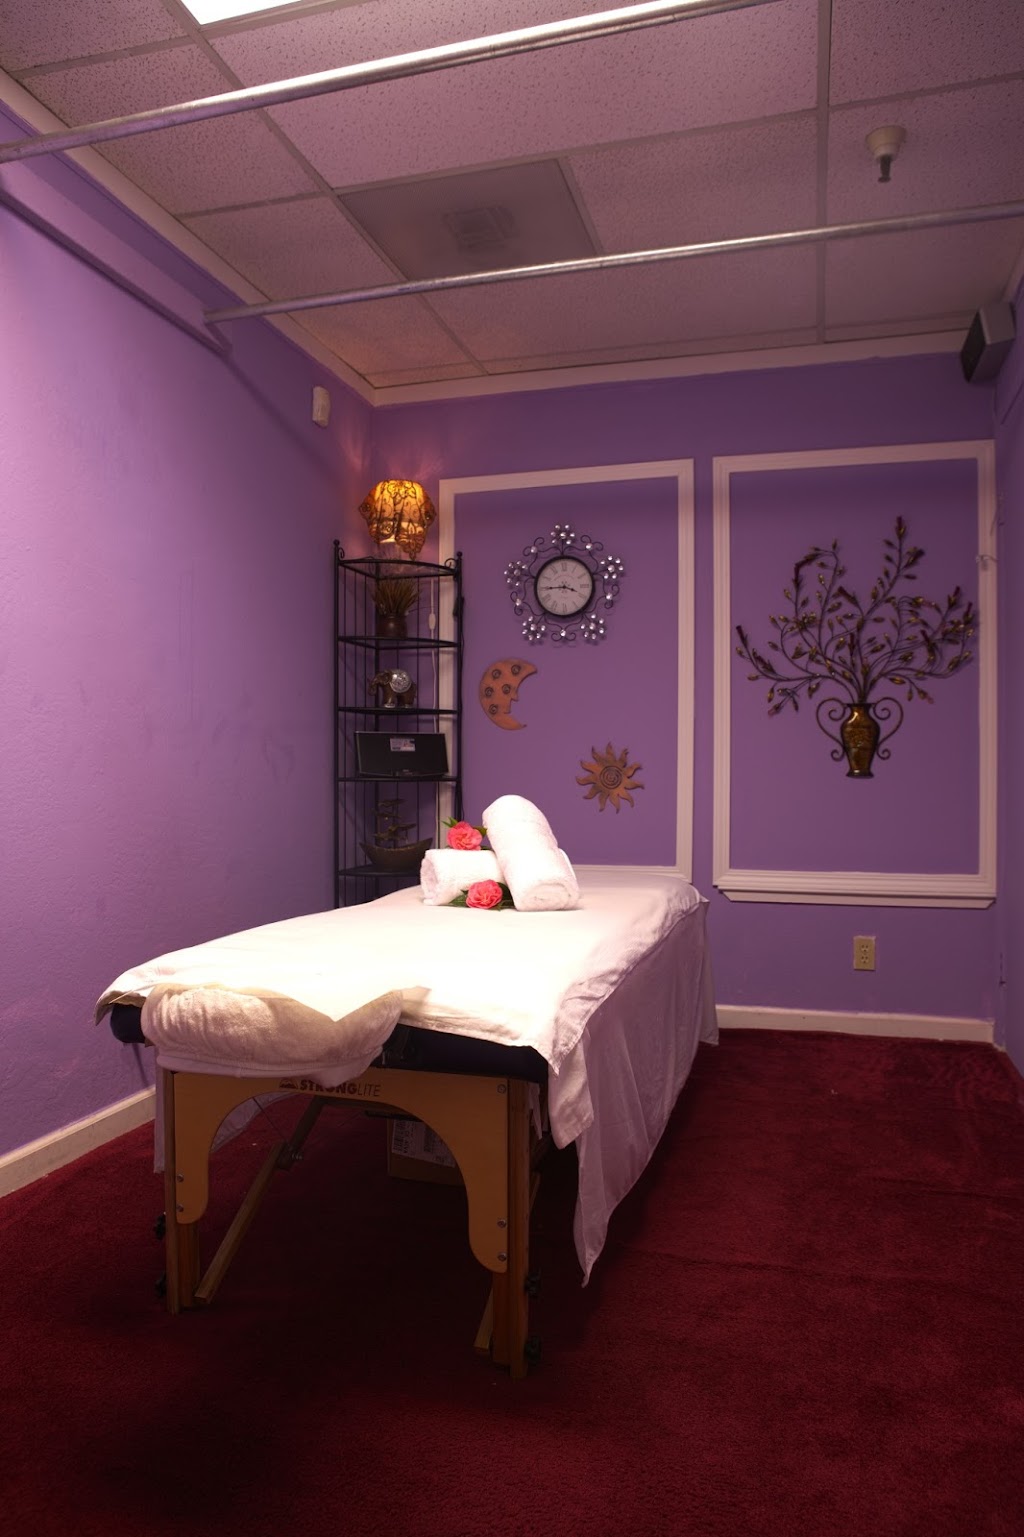 Cupertino Massage Foothill Acupuncture Center and Spa | 10011 N Foothill Blvd, Cupertino, CA 95014 | Phone: (408) 996-2229